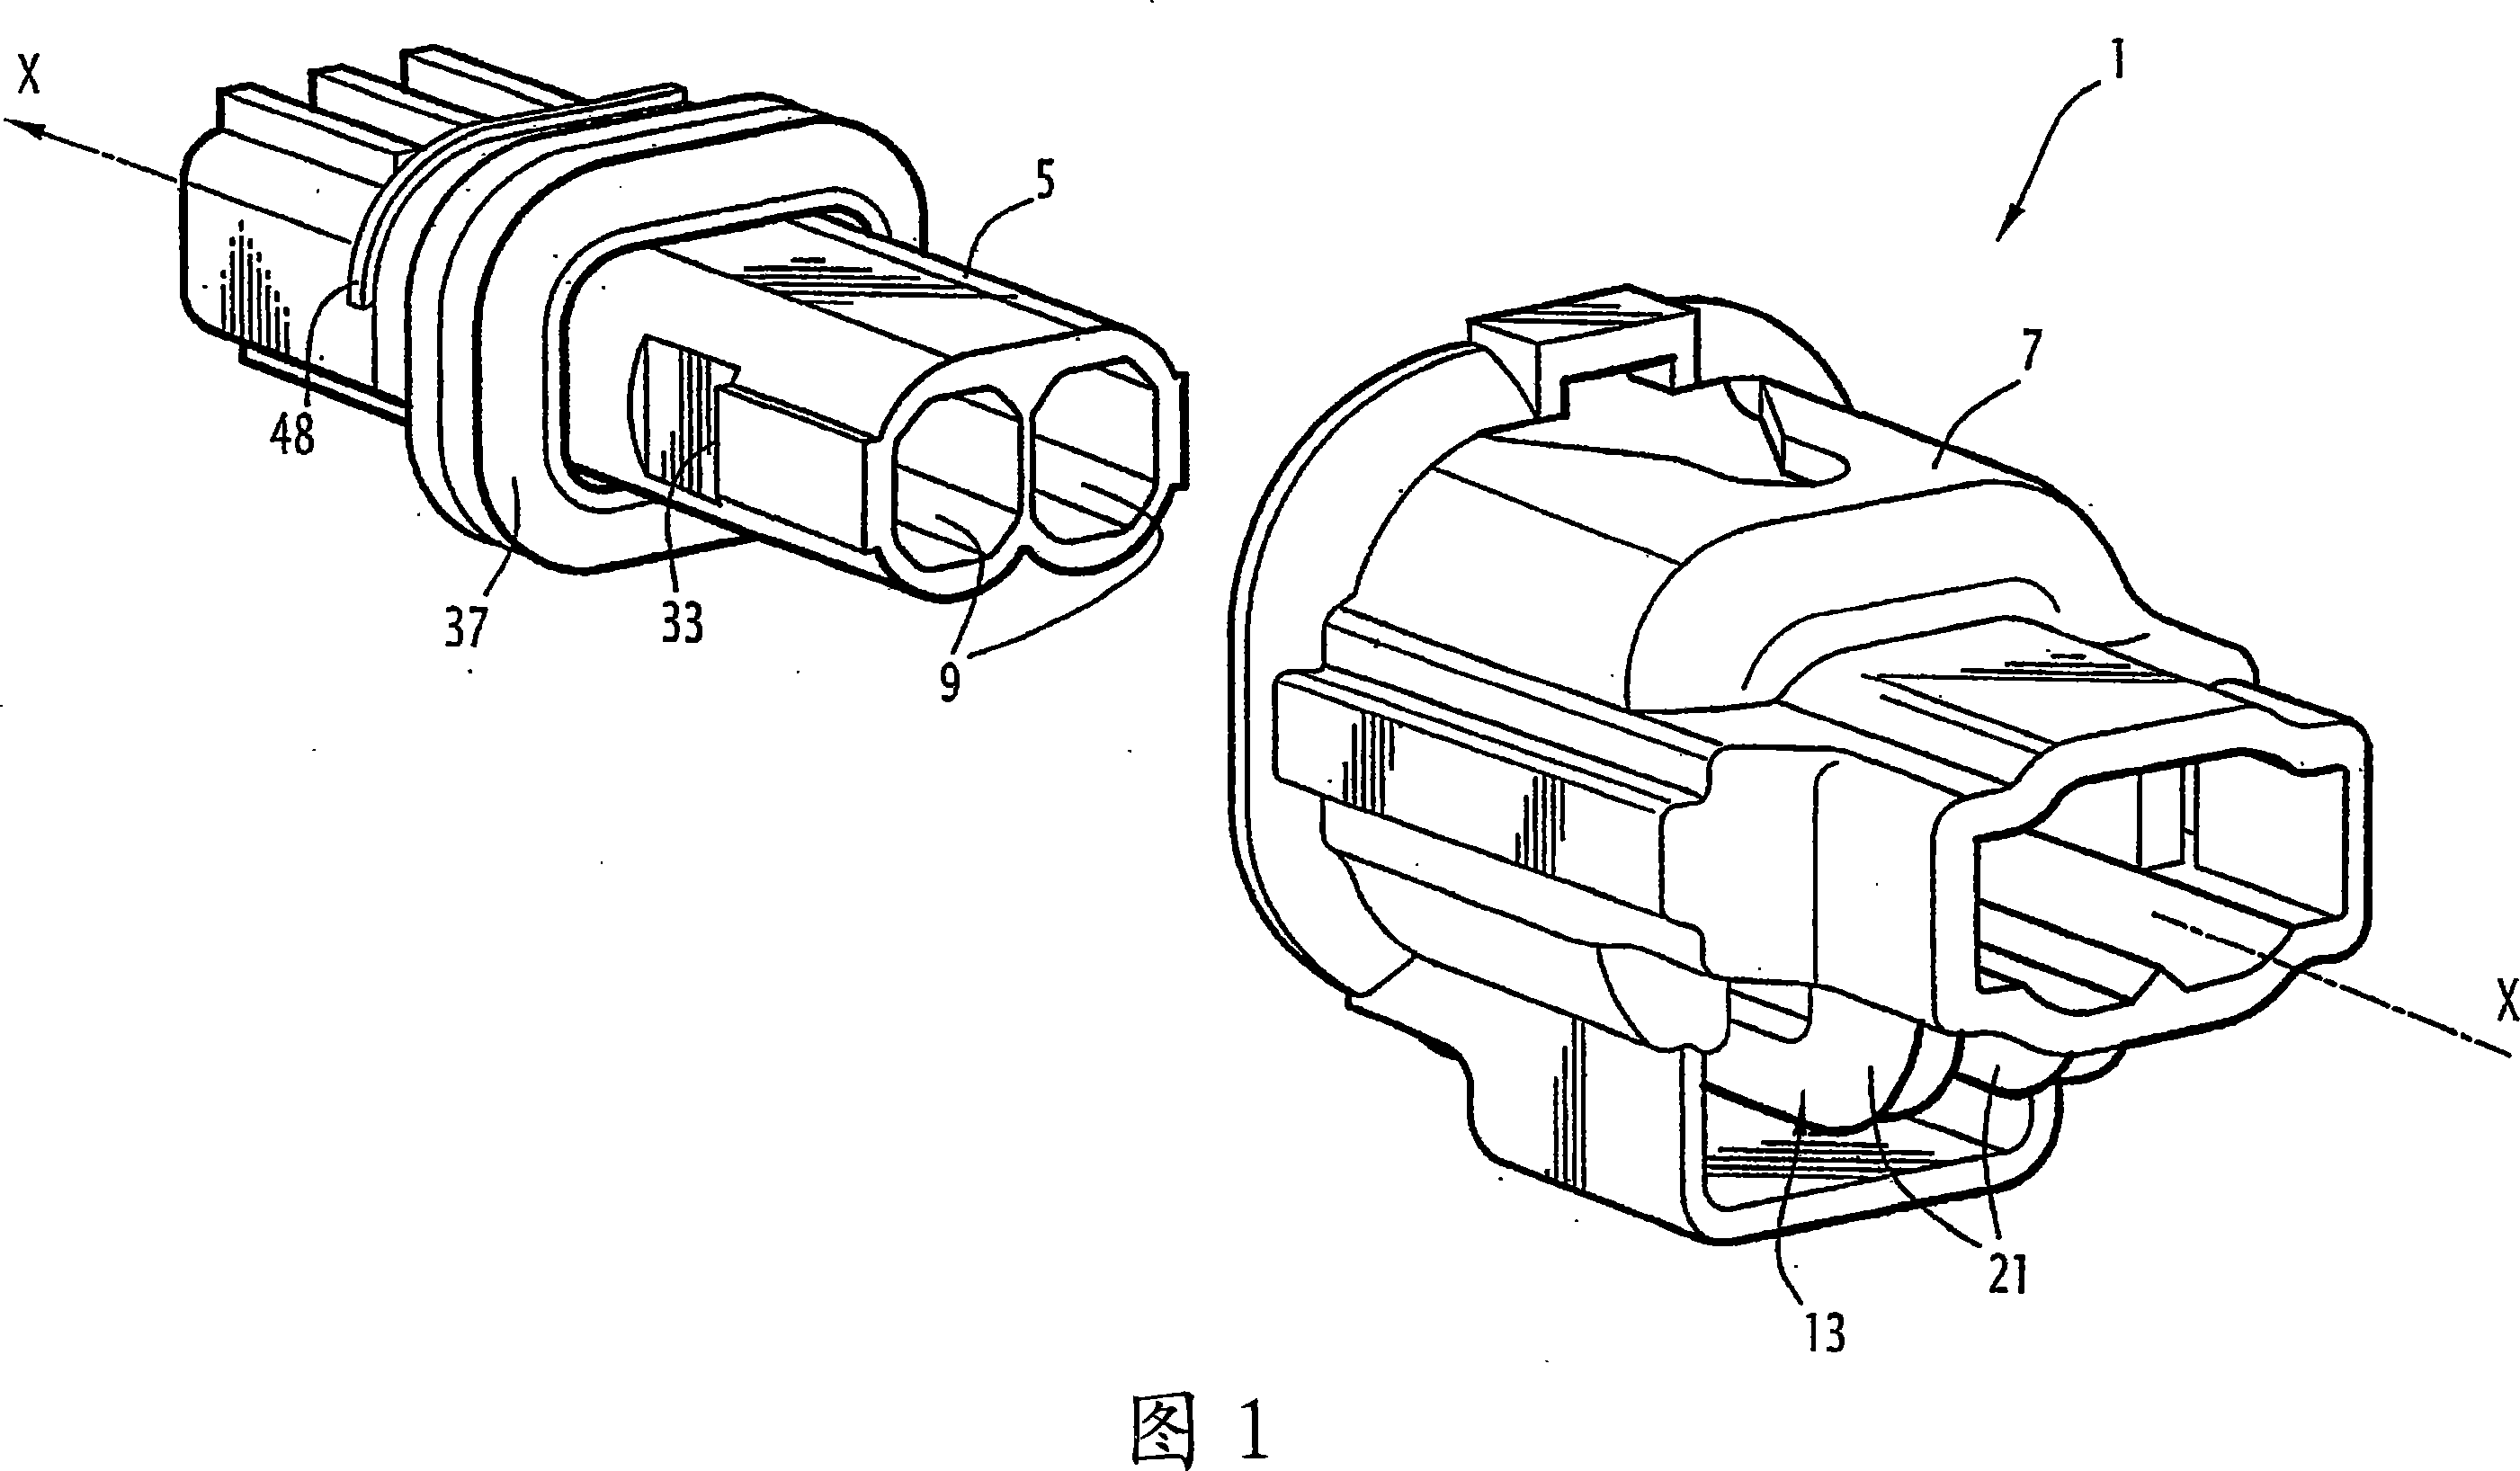 Electrical connector for attenuating vibrations, in particular for the injector of a motor vehicle engine